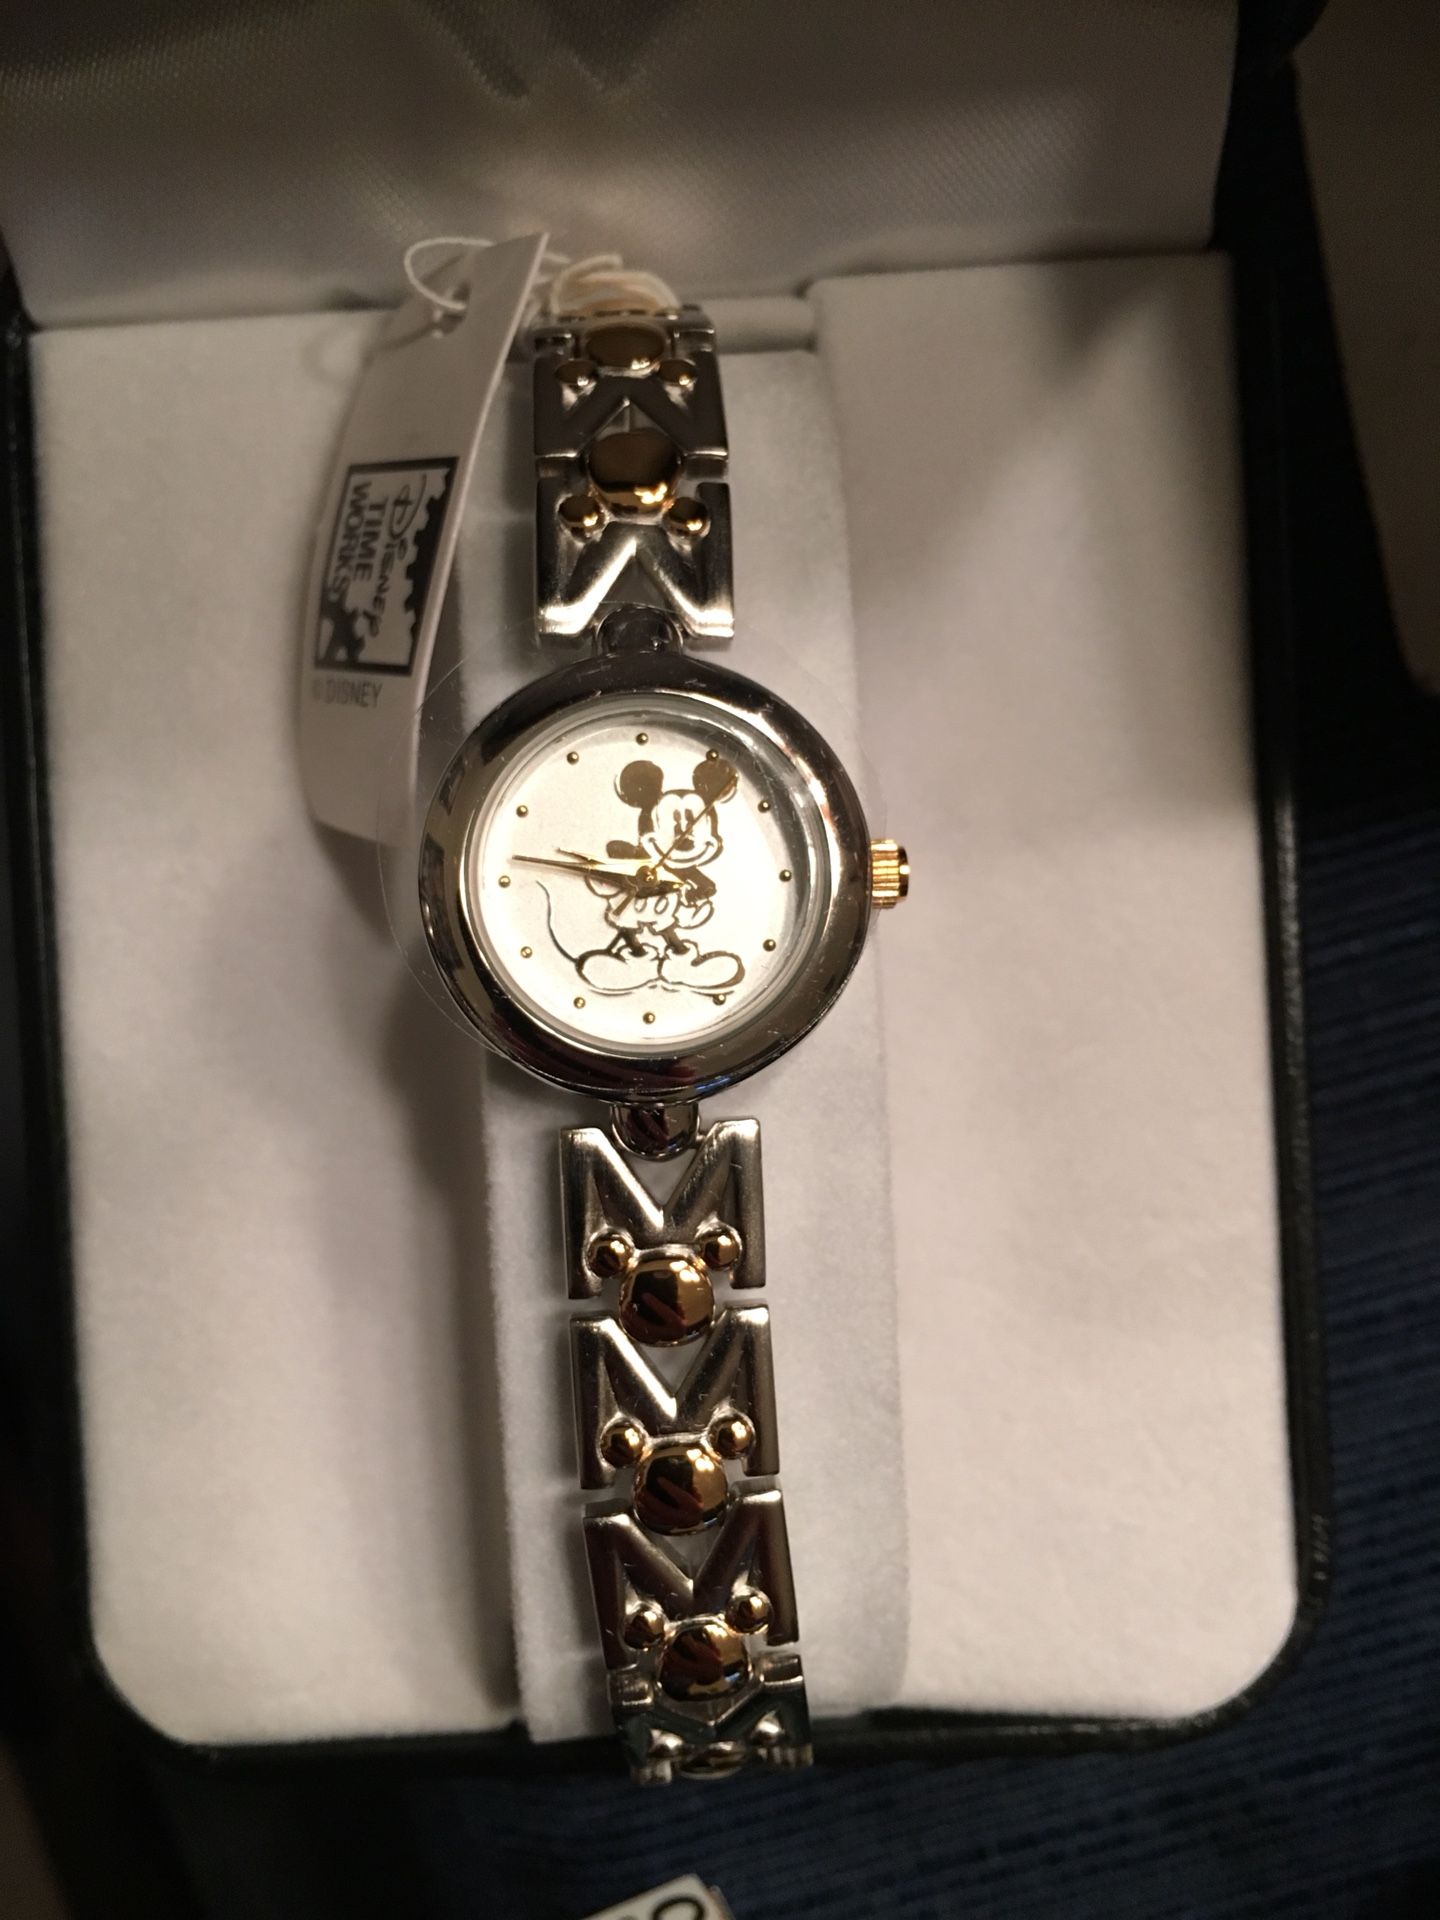 Disney Watch - NEW, tags on, gold and silver design, box included